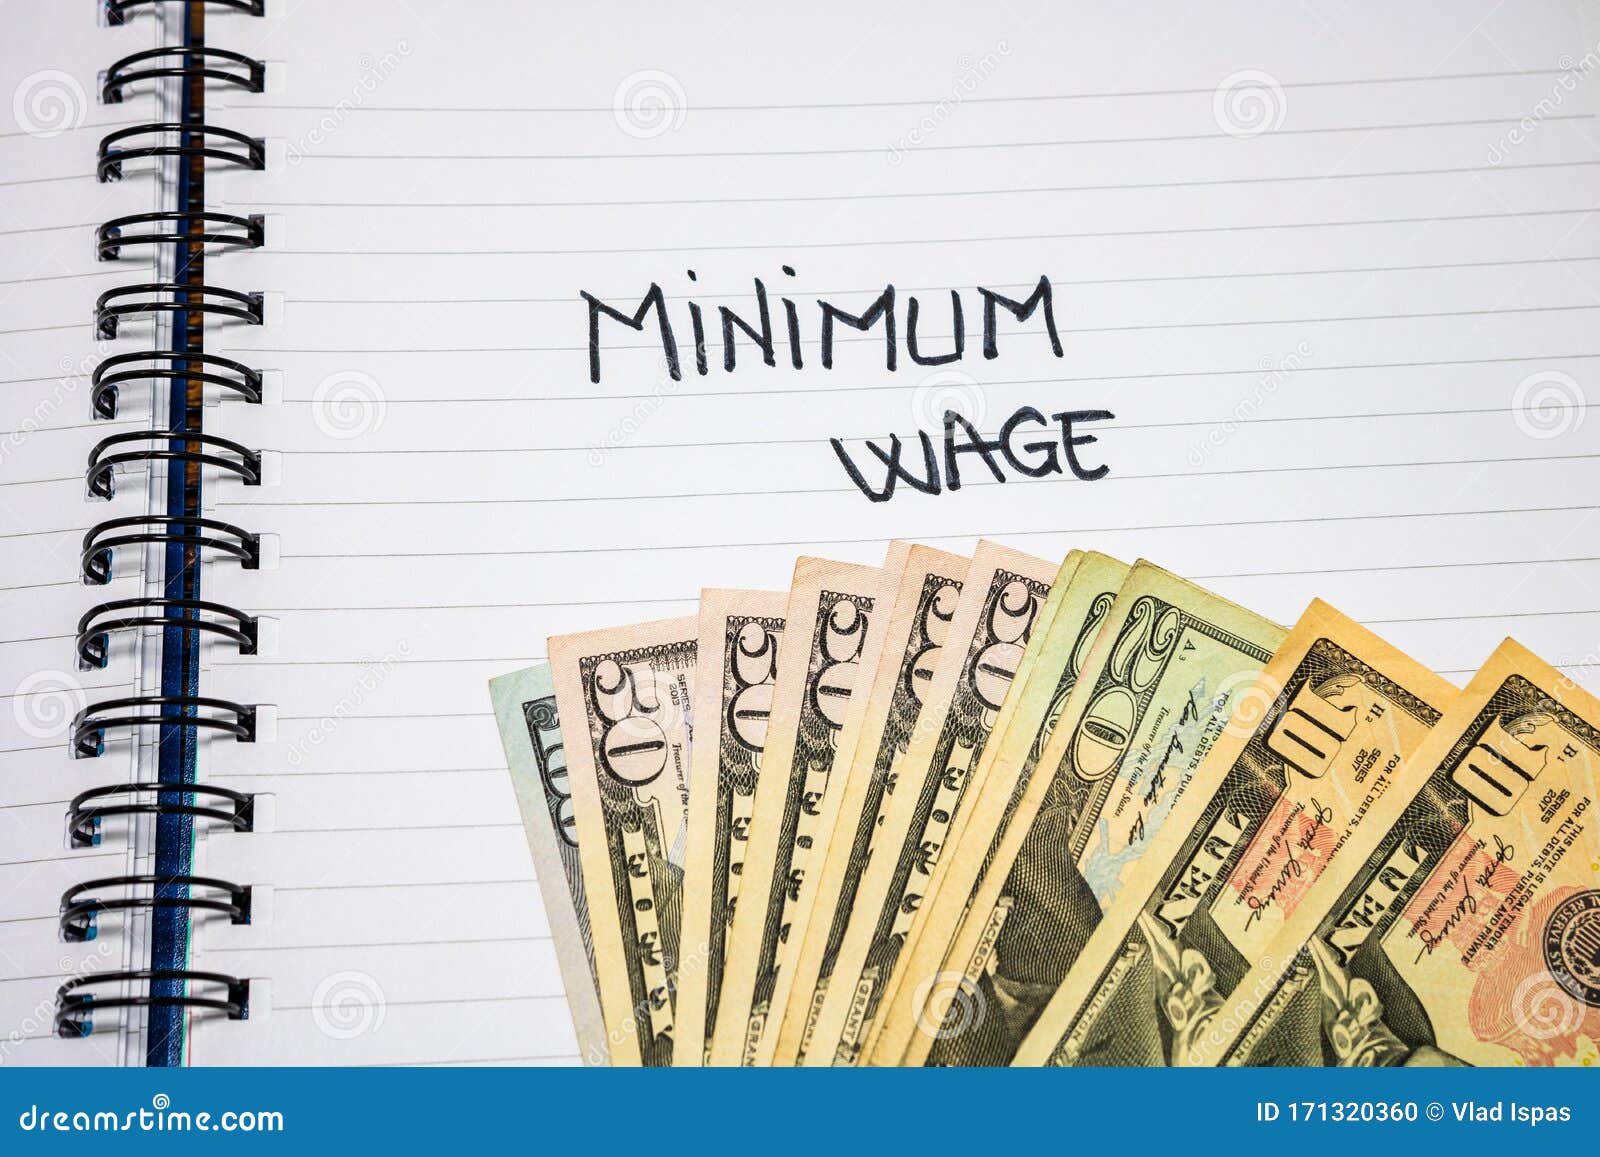 minimum wage handwriting  text on paper, on office agenda. copy space